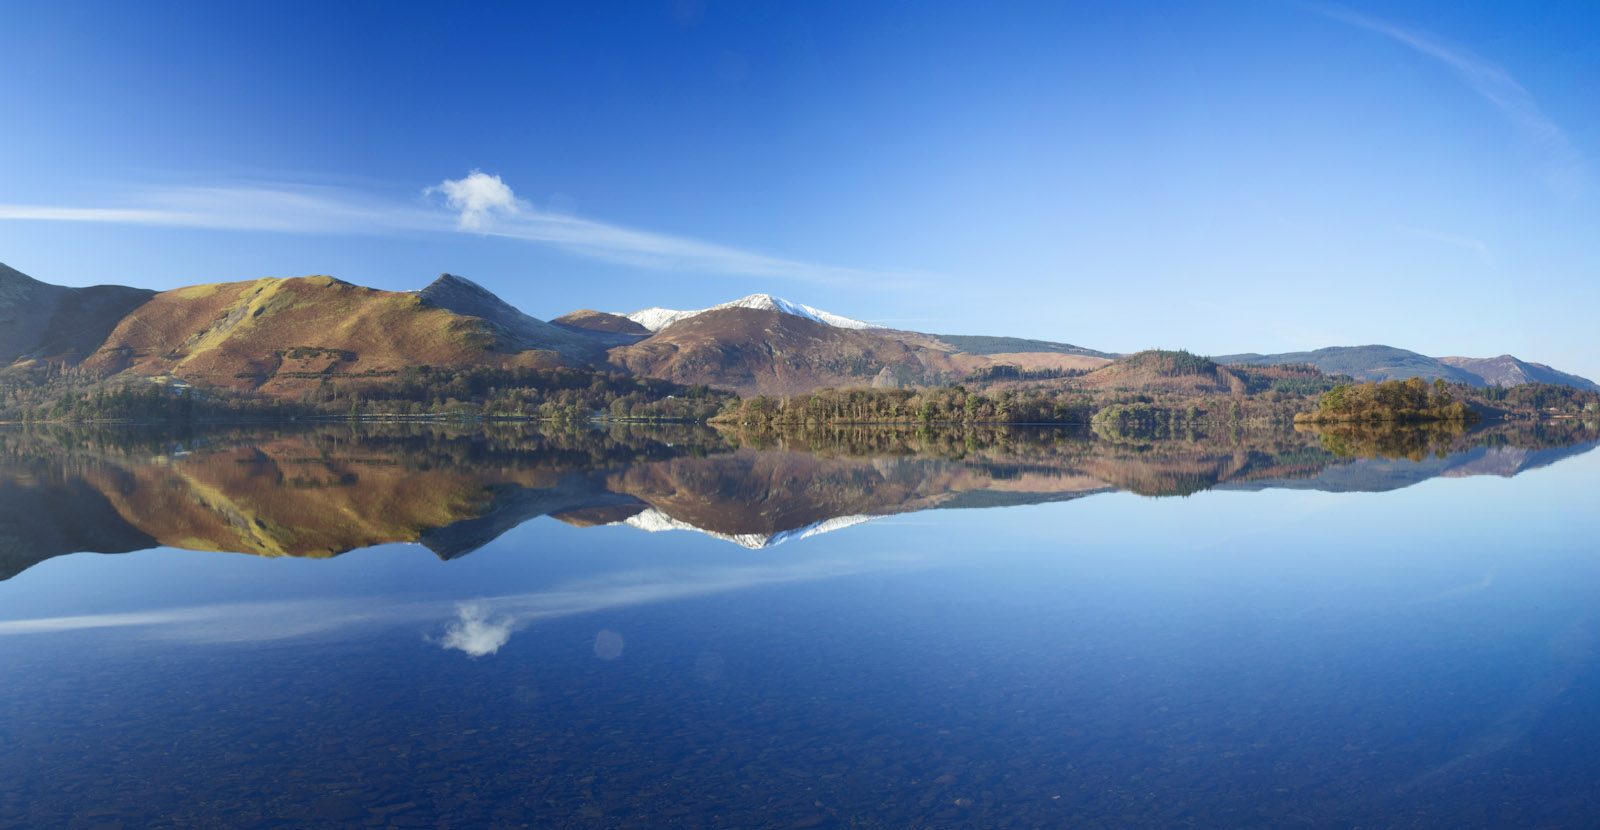 Derwentwater House - kate & tom's Large Holiday Homes